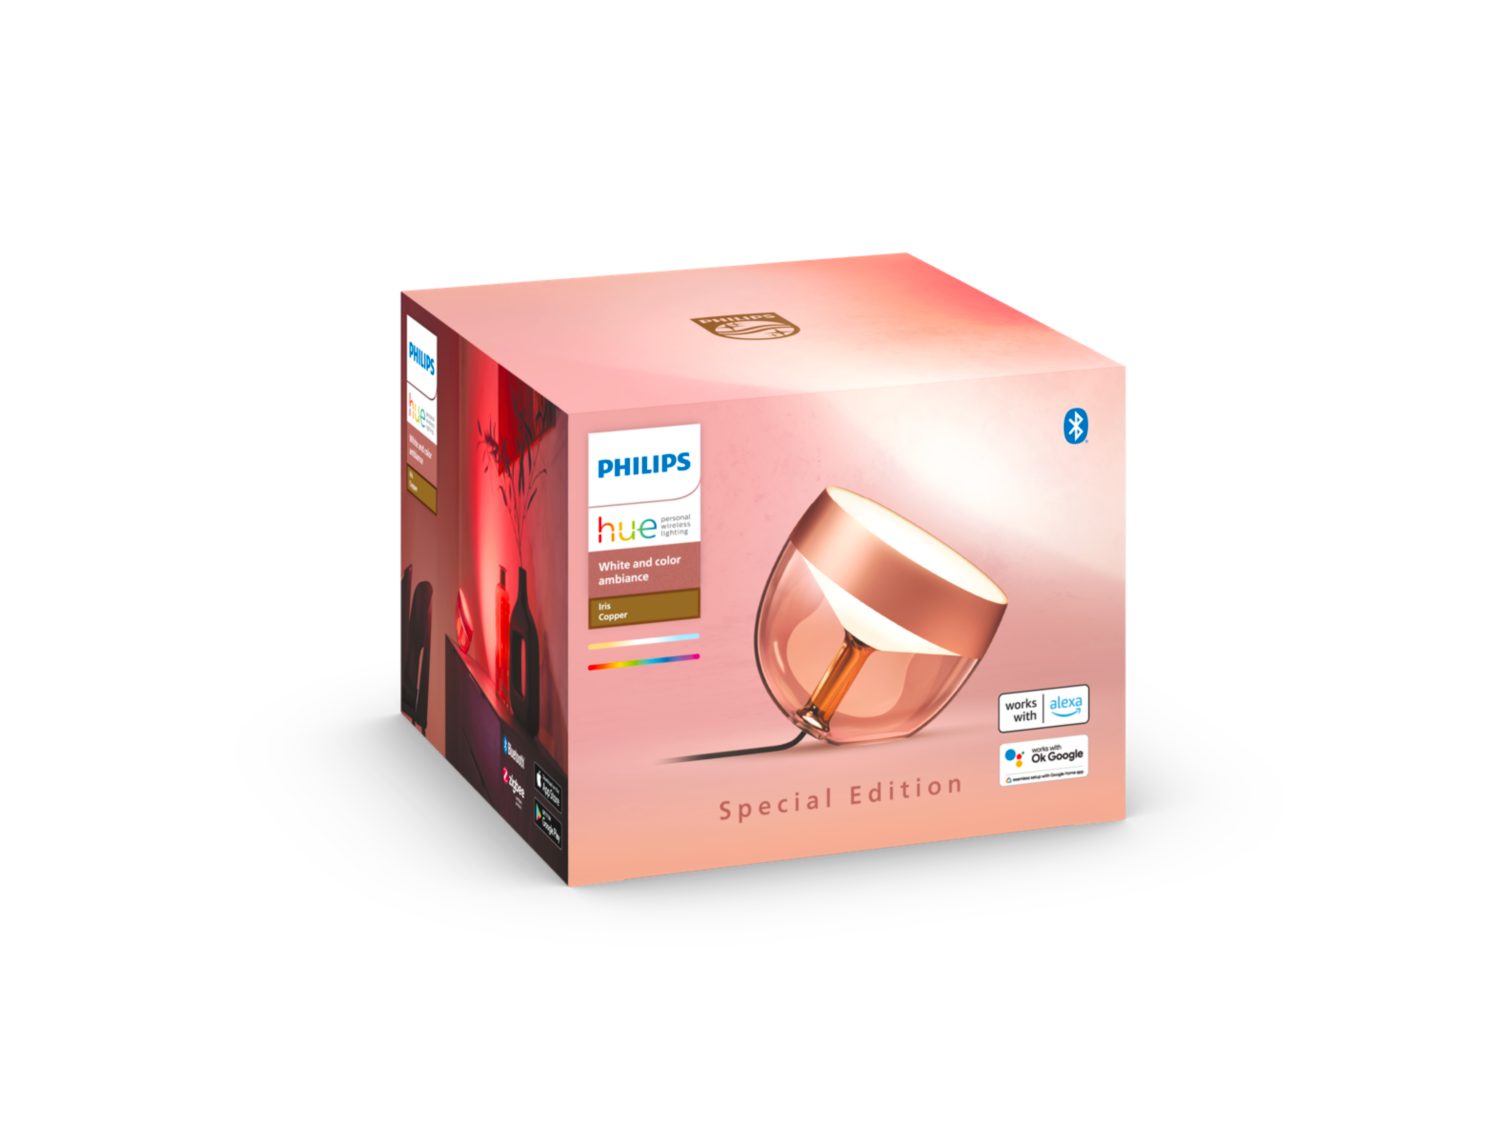 Philips Hue Iris Table Lamp - Copper Special Edition in the box